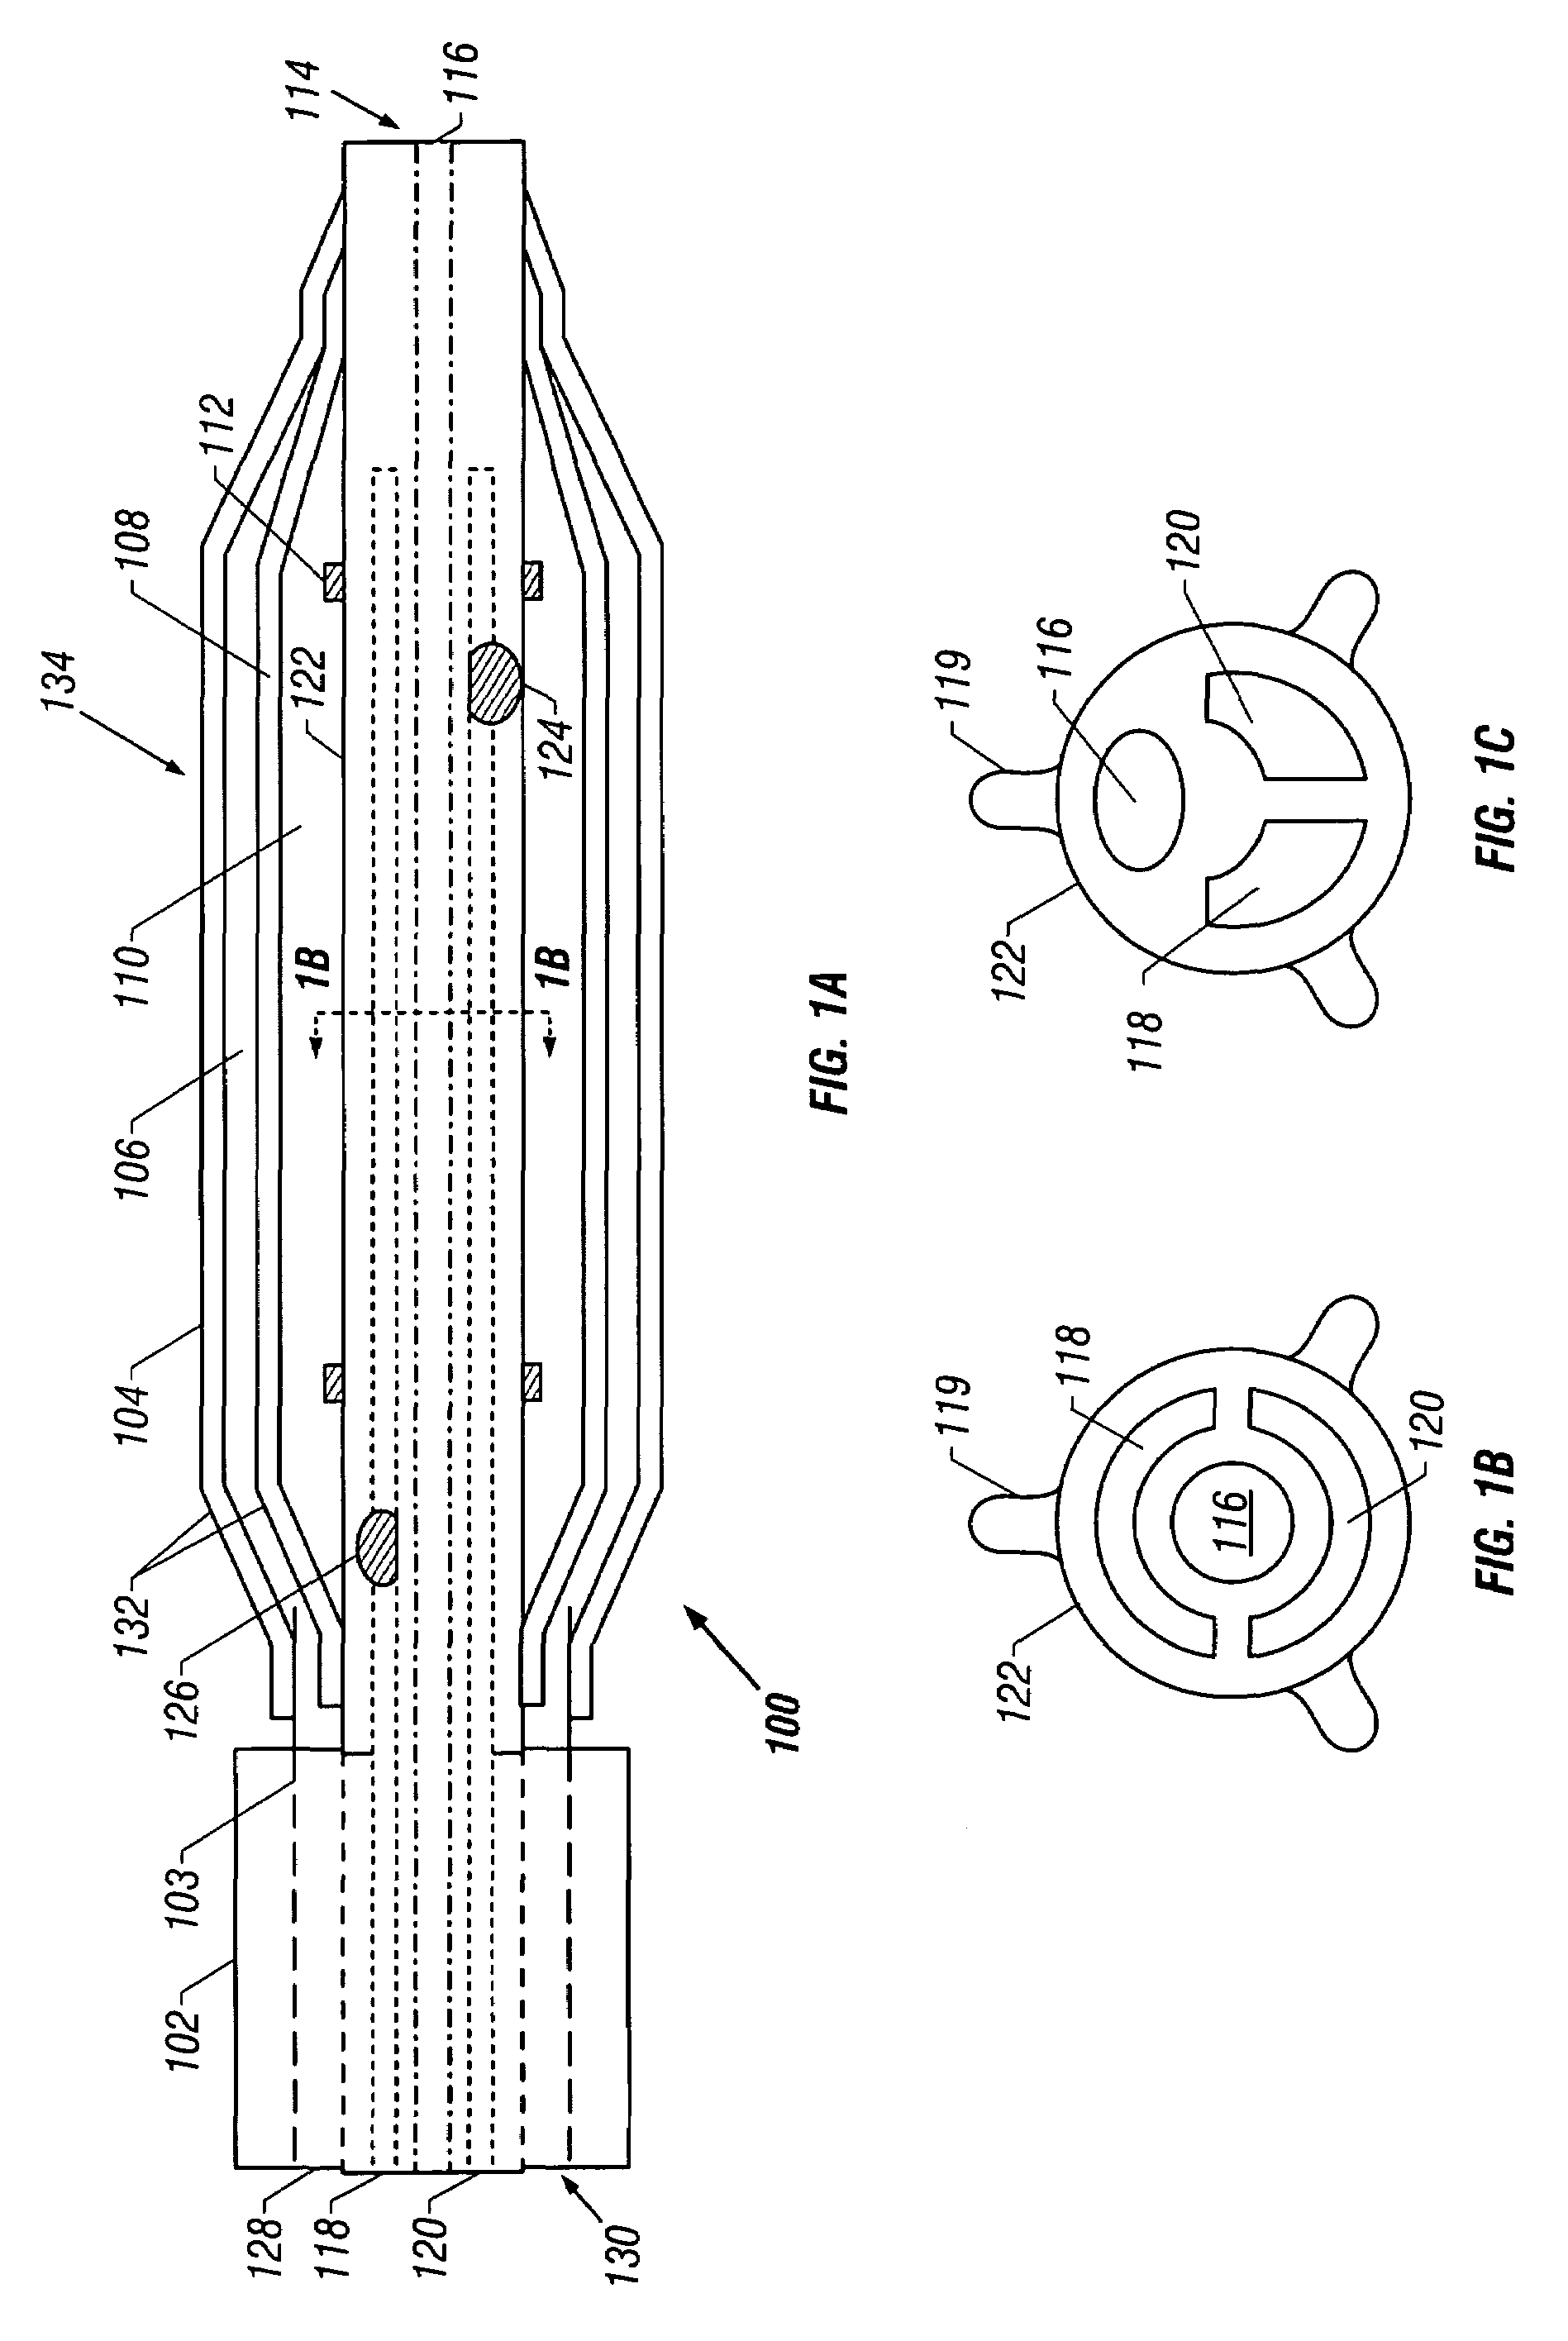 Method and device for performing cooling- or cryo-therapies for, e.g., angioplasty with reduced restenosis or pulmonary vein cell necrosis to inhibit atrial fibrillation employing microporous balloon